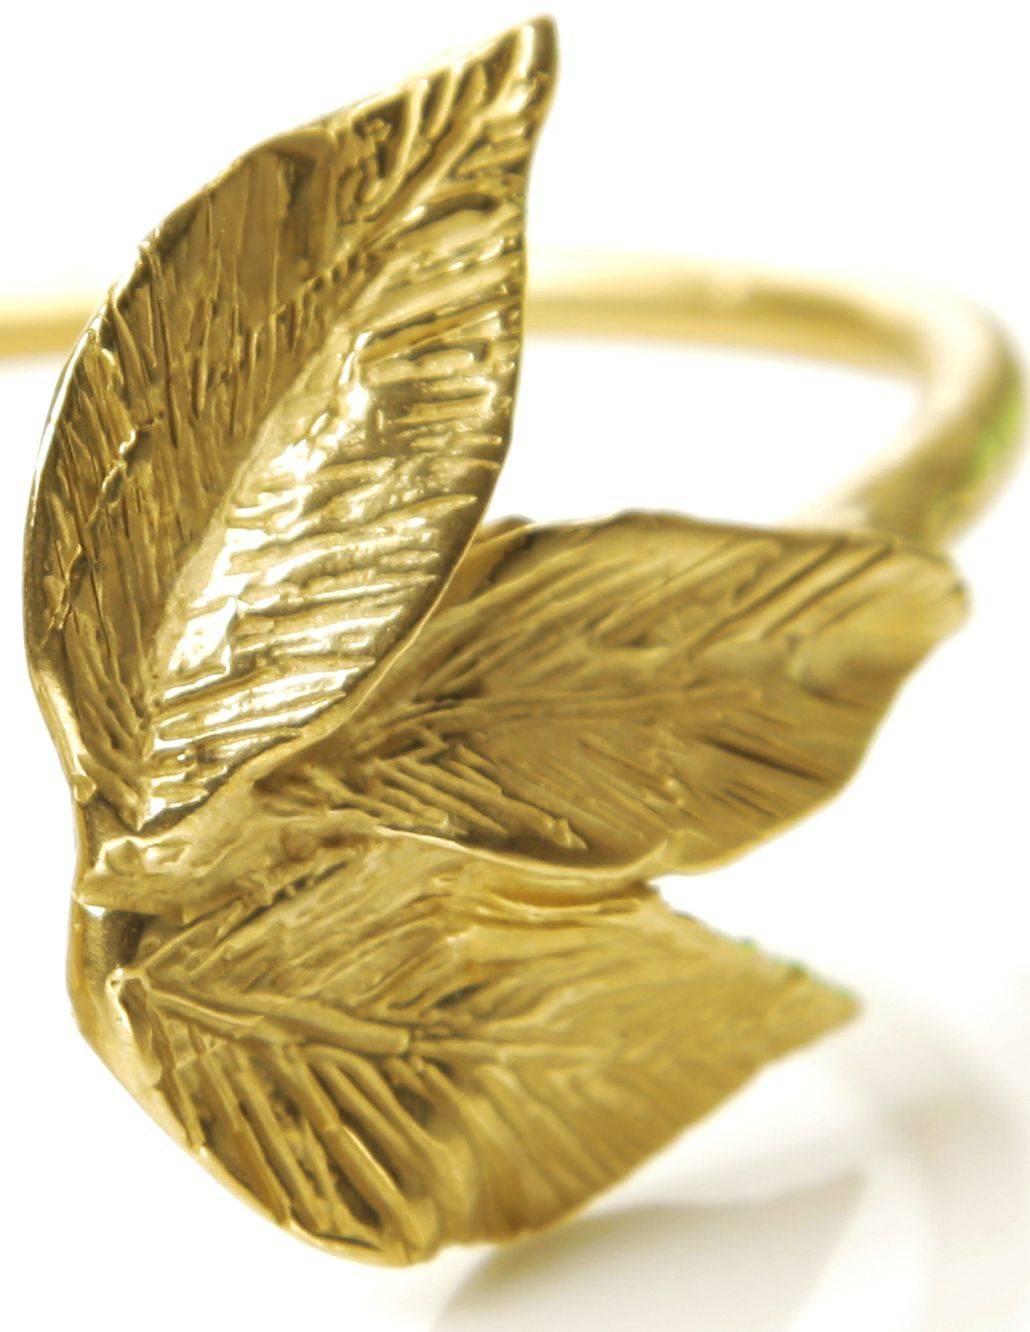 This bracelet is created in Italy with a lost wax technique  and handmade.
Completely inspired by nature, in particular to light which gives vitality to material.
Giulia Barela jewels are characterized, stylistically, from strong sculptural effects.